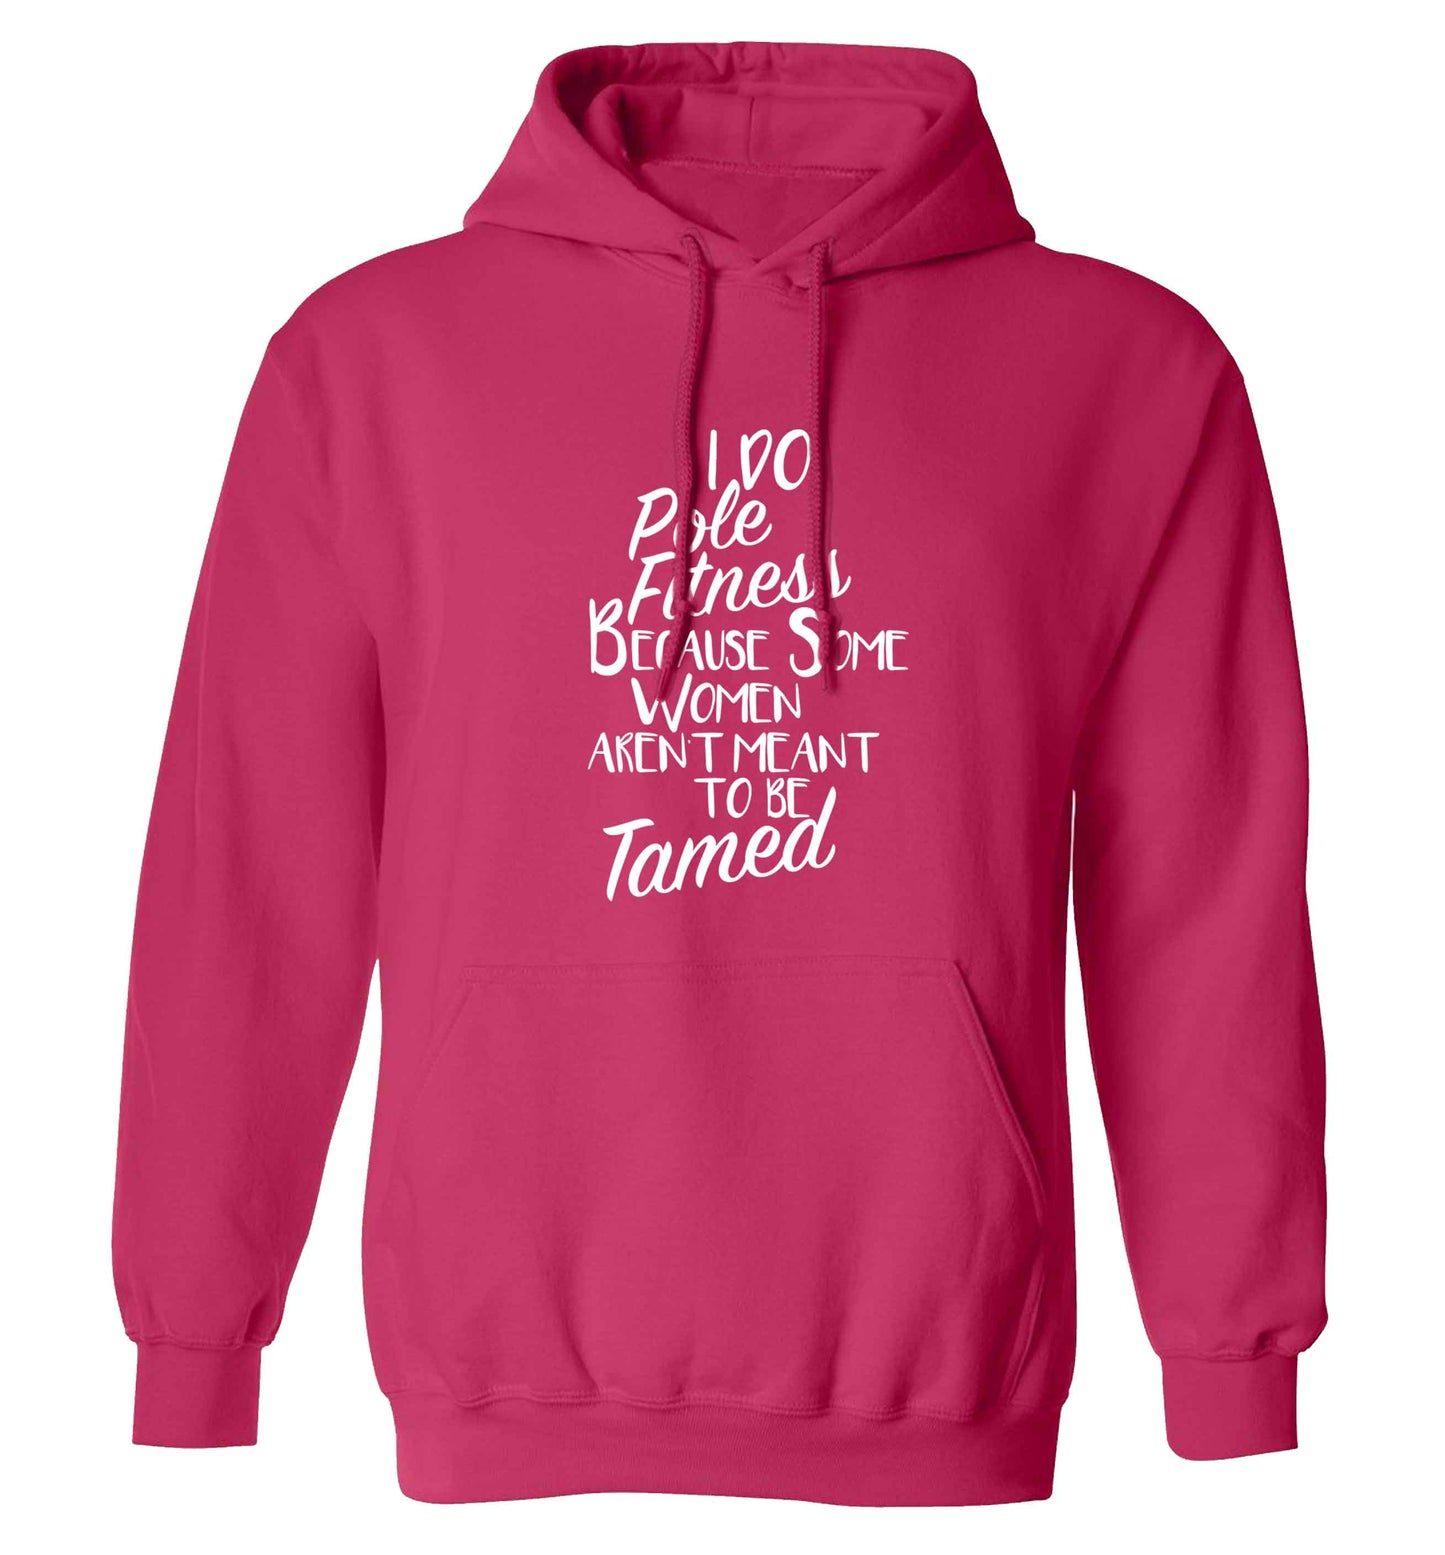 I do pole fitness because some women aren't meant to be tamed adults unisex pink hoodie 2XL